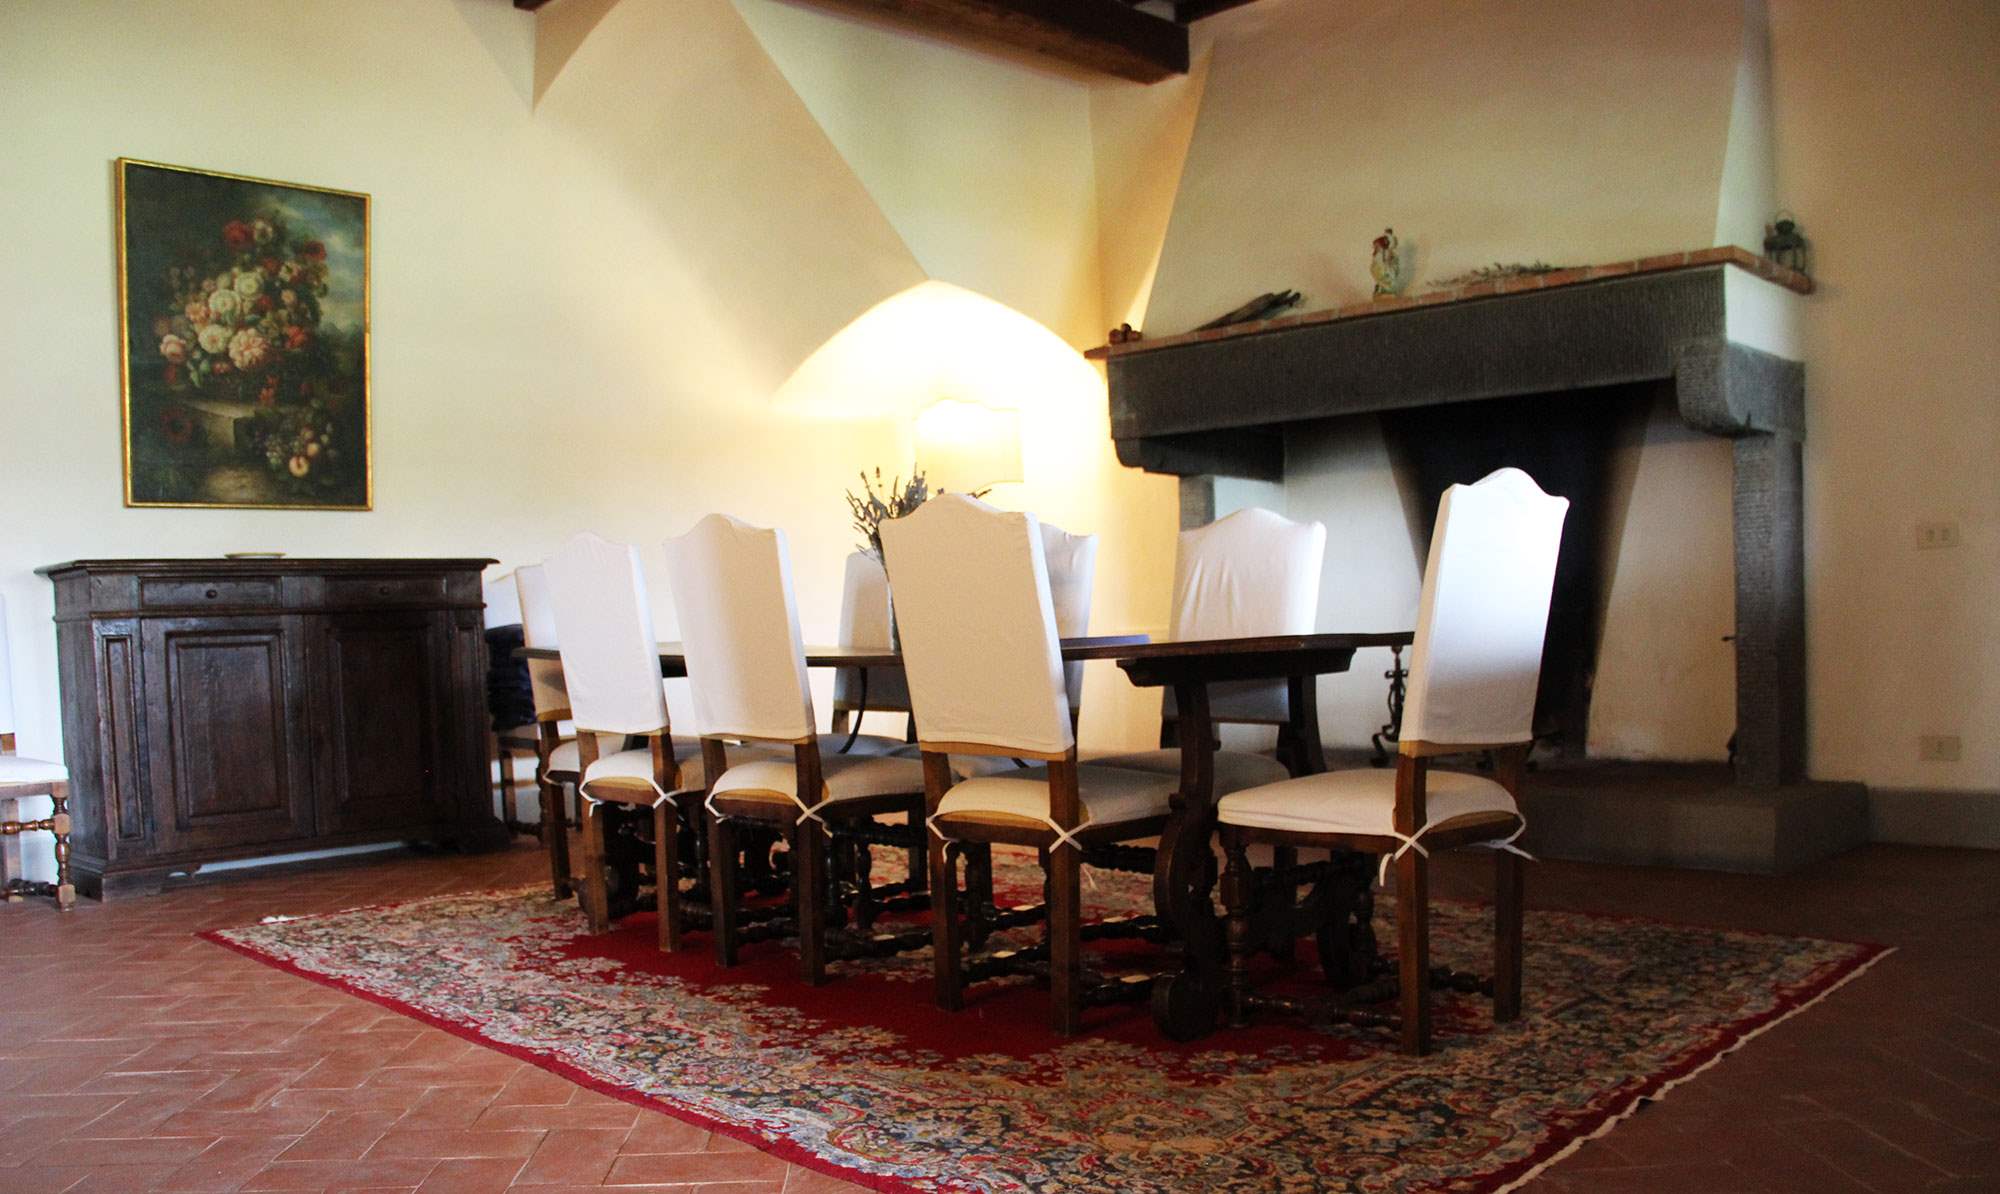 Apartment Loggia, 4 bedroom apartment in Chianti & Countryside, Tuscany Photo #8